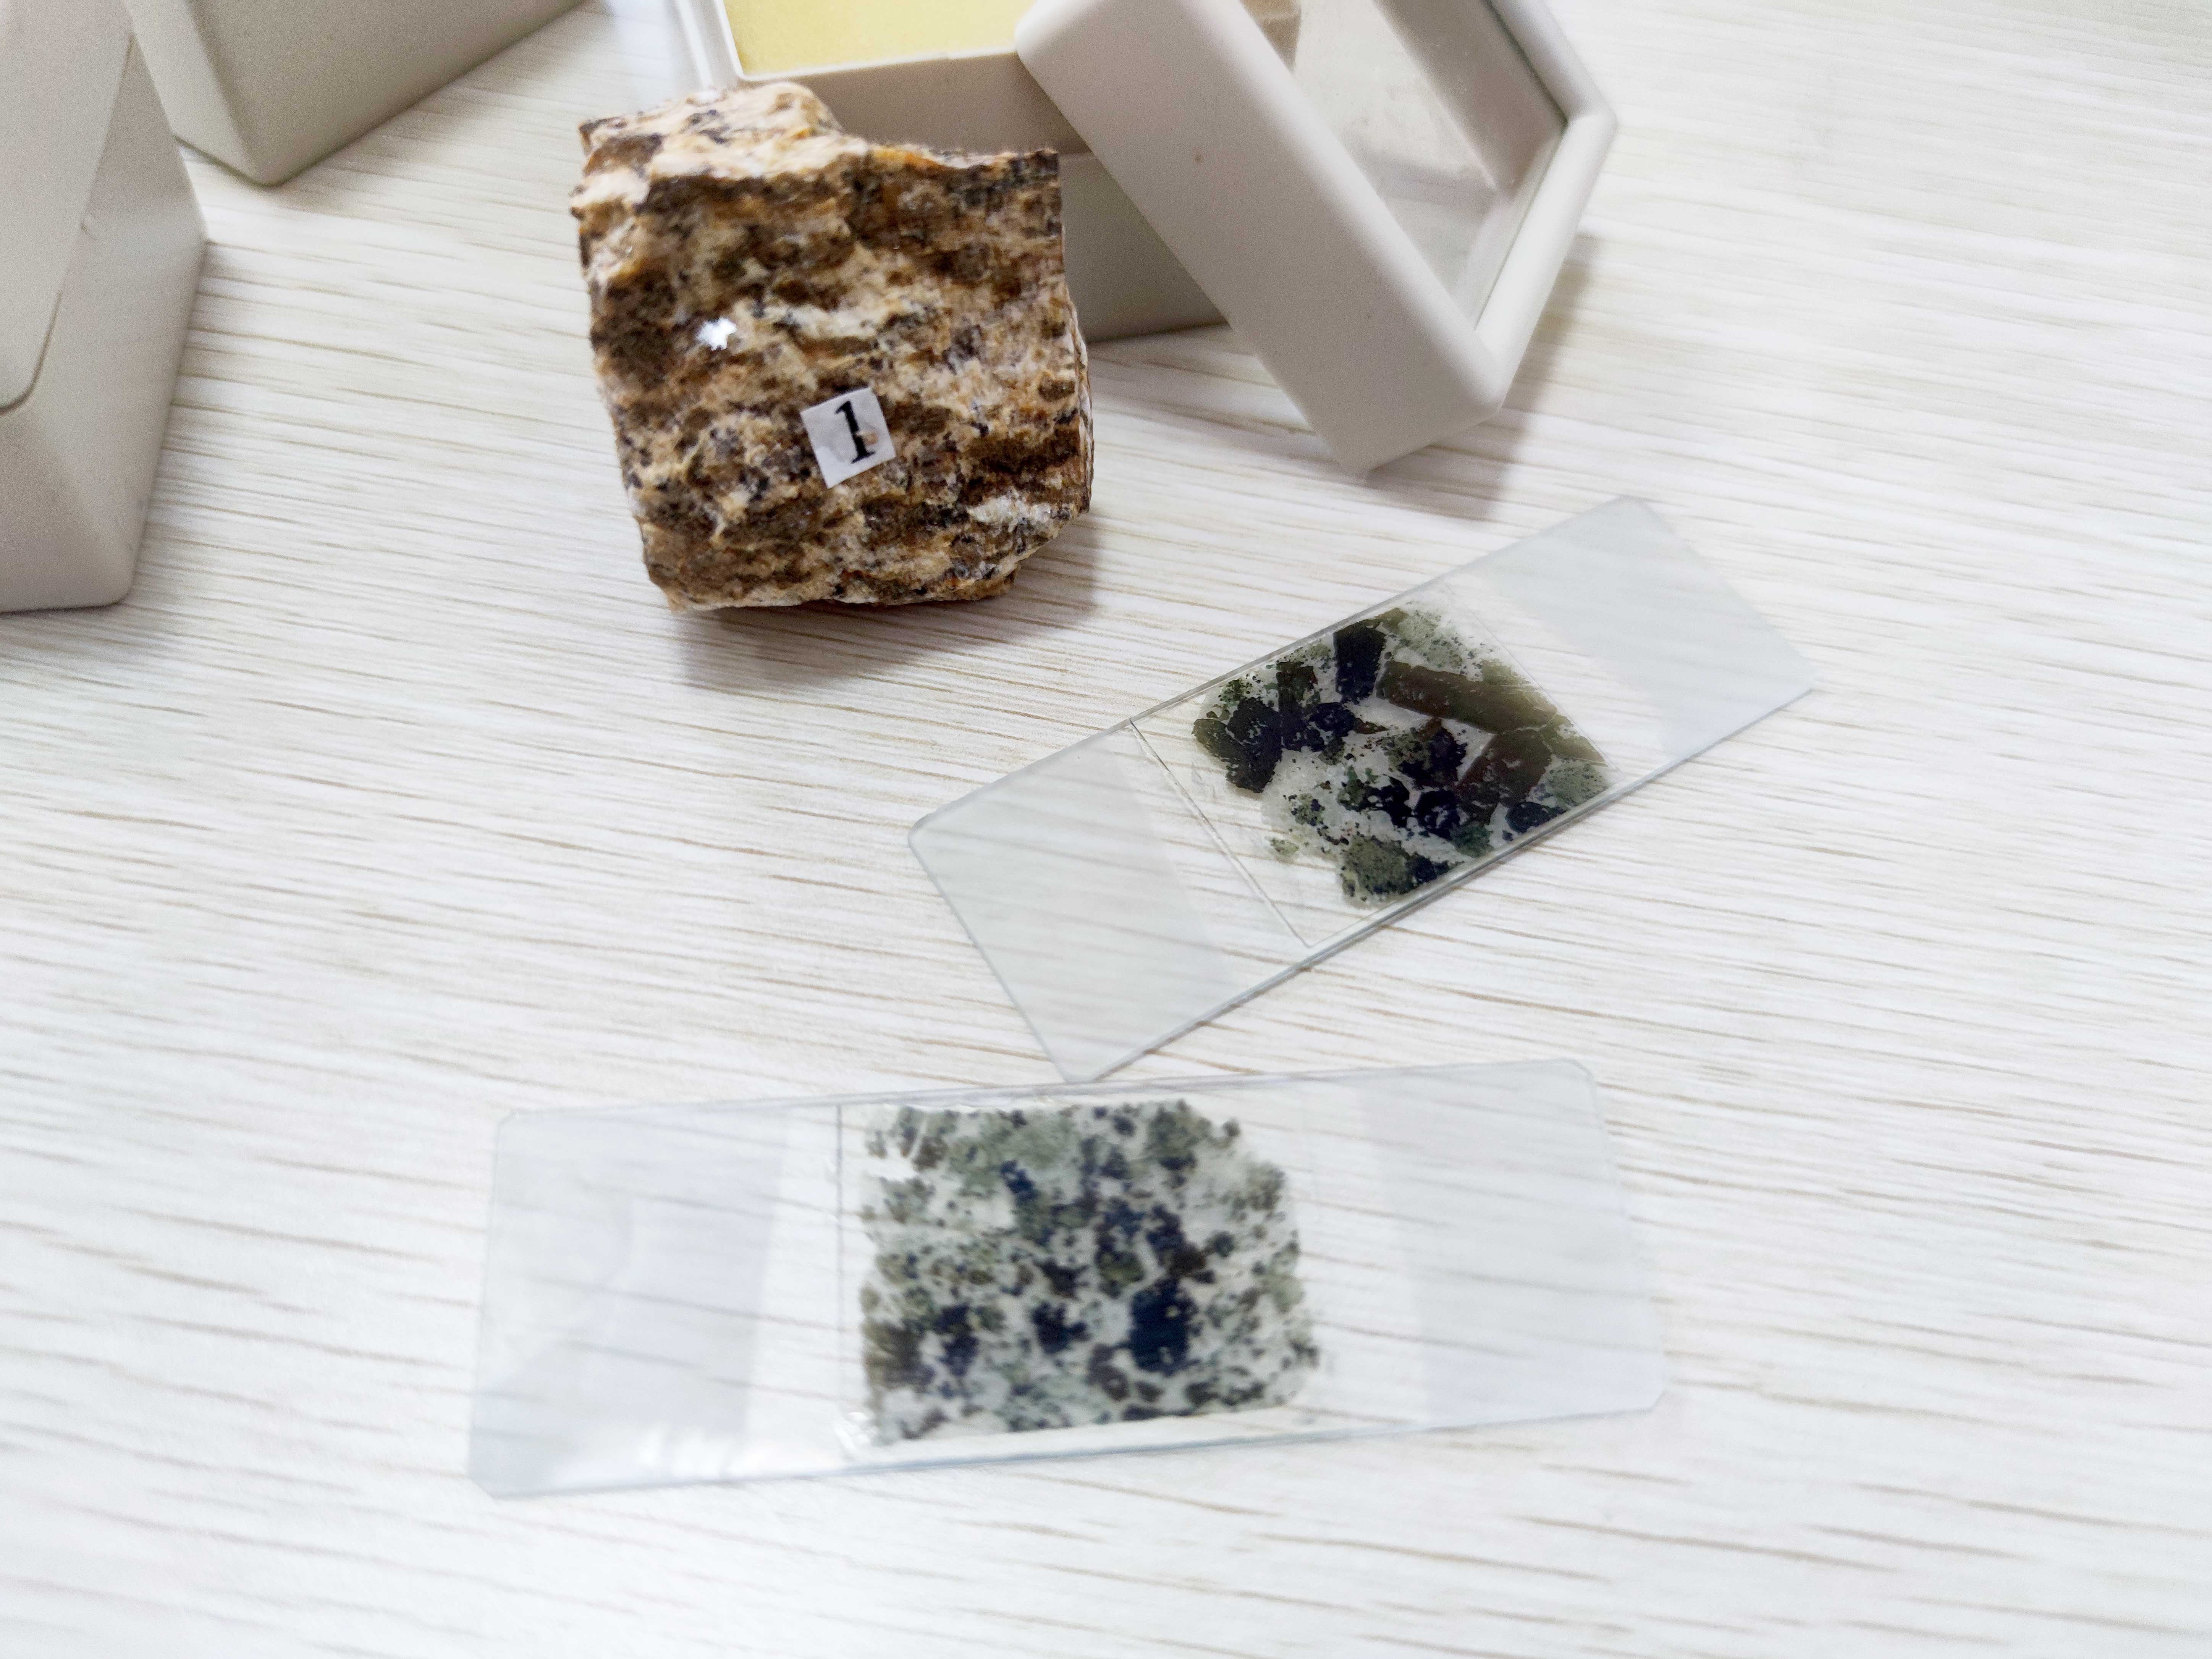 Microscope slides prepared by grinding mineral slides for teaching experiments